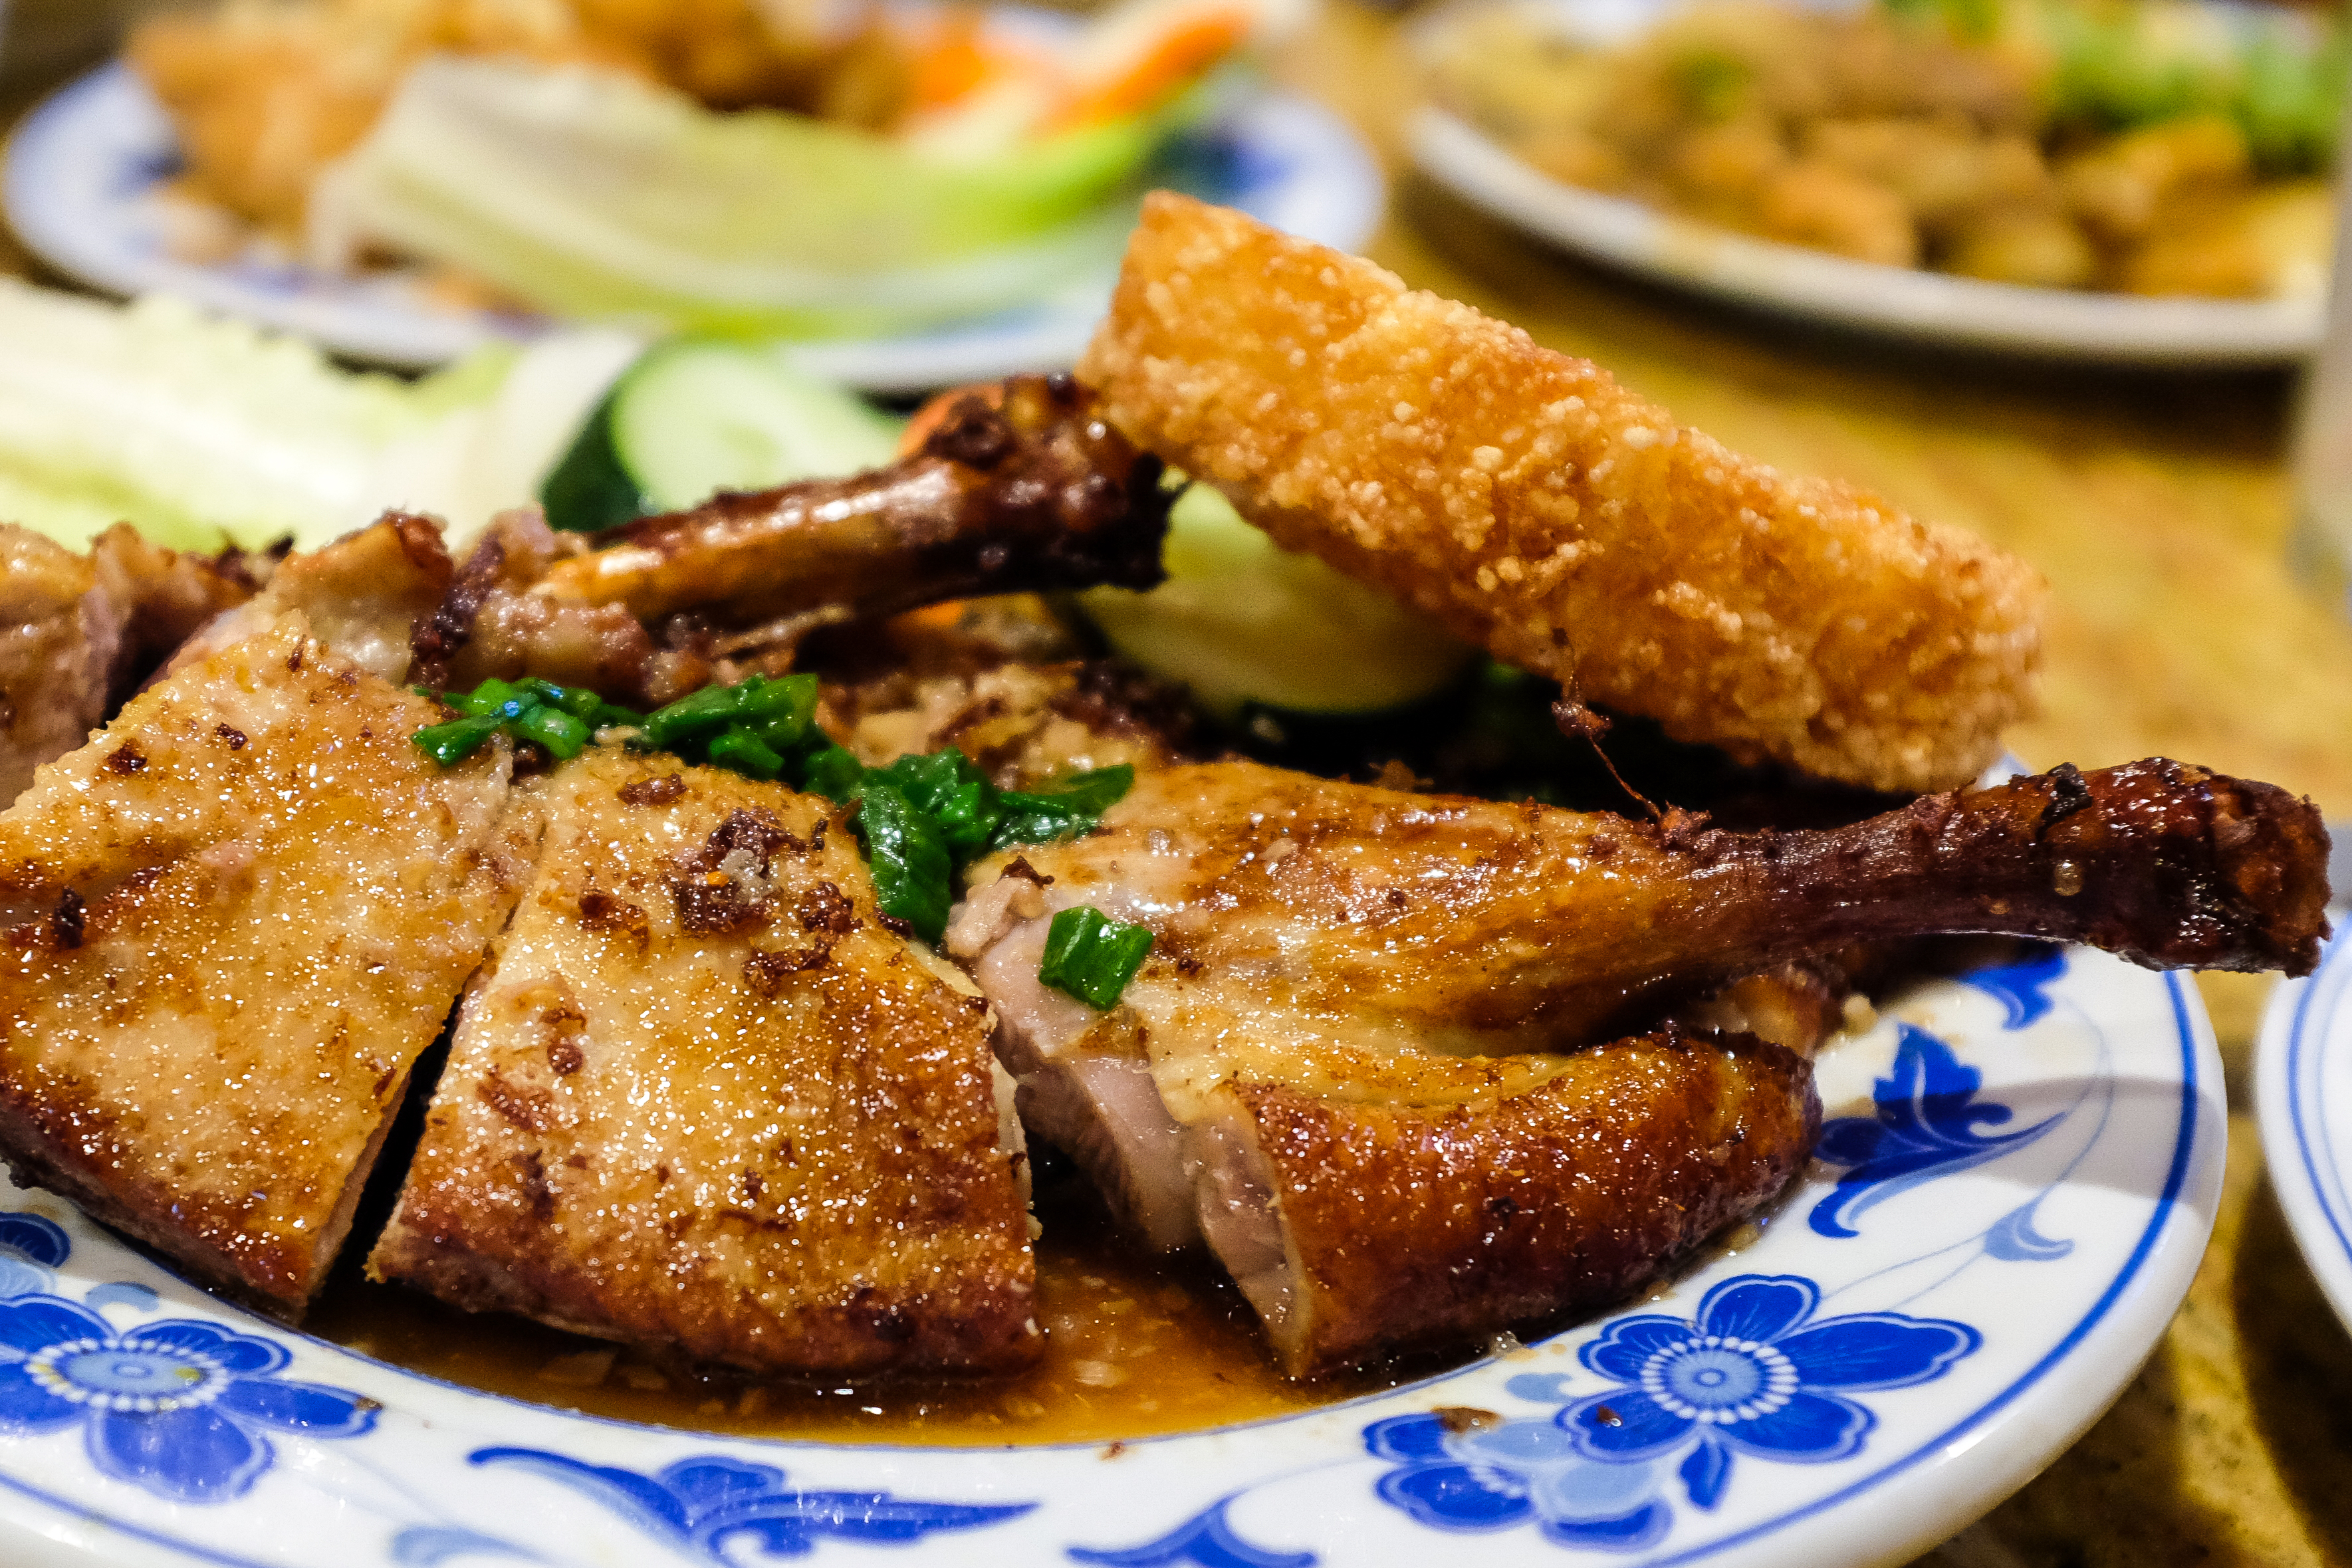 A blue and white plate of crispy roasted duck next to cucumbers and topped with a fried rice patty.